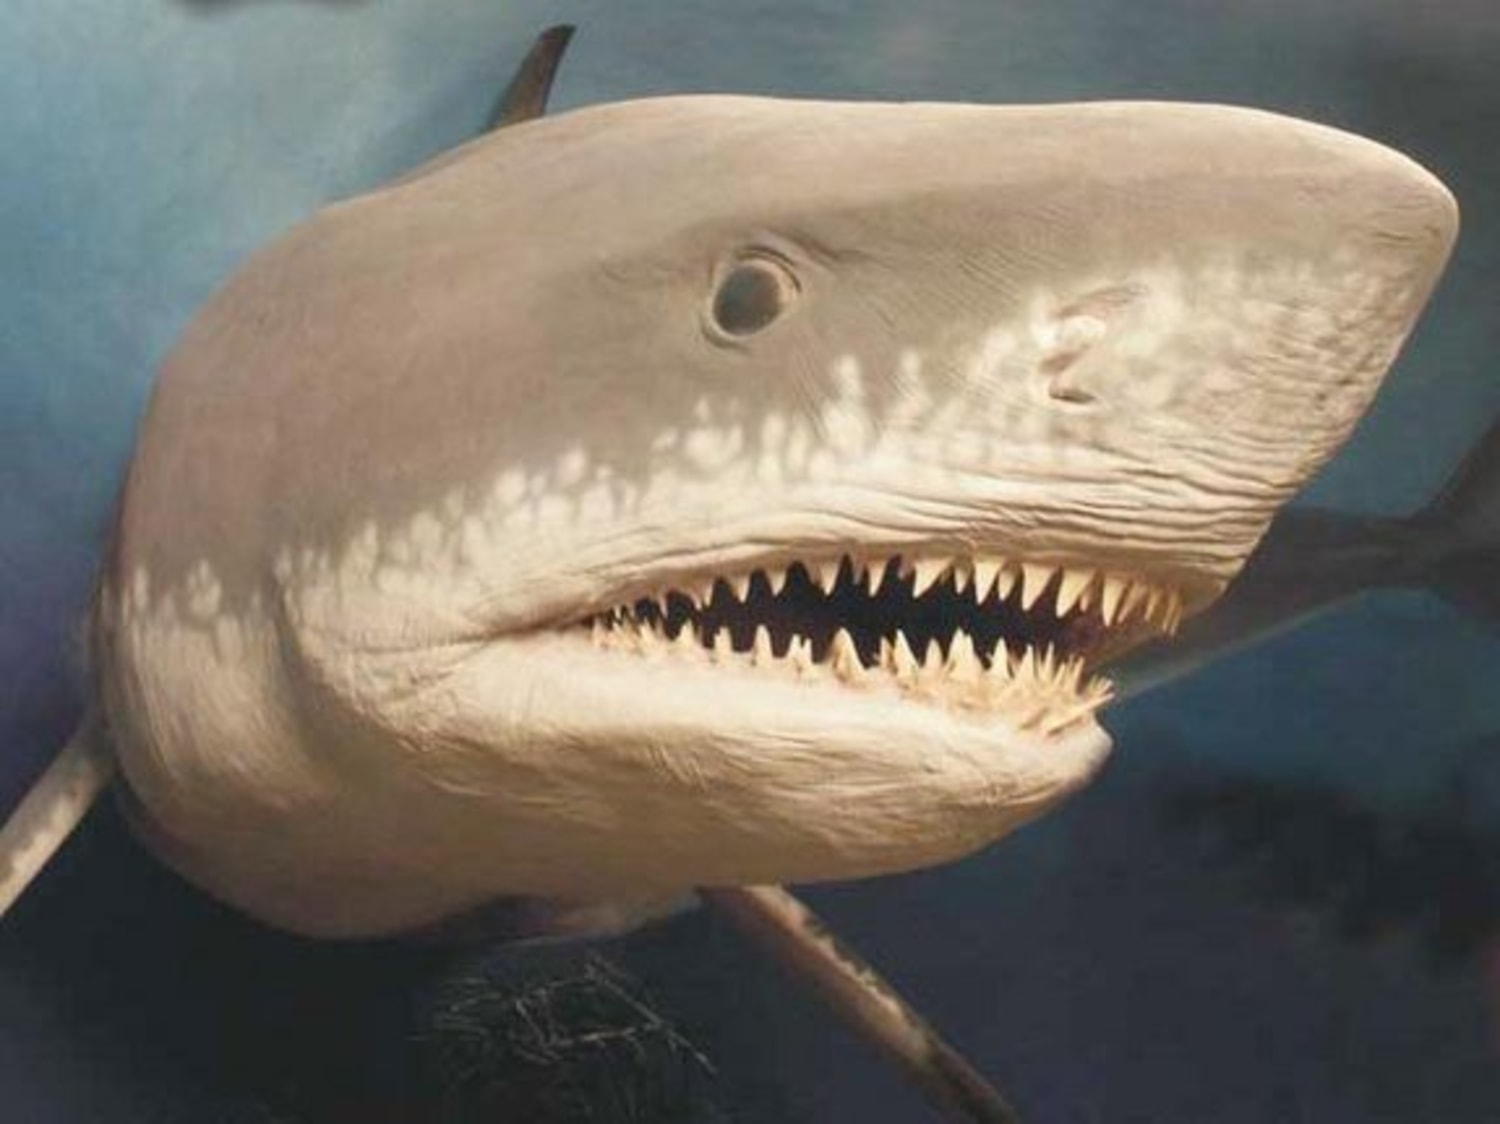 Extinct Megalodon, the largest shark ever, may have grown too big